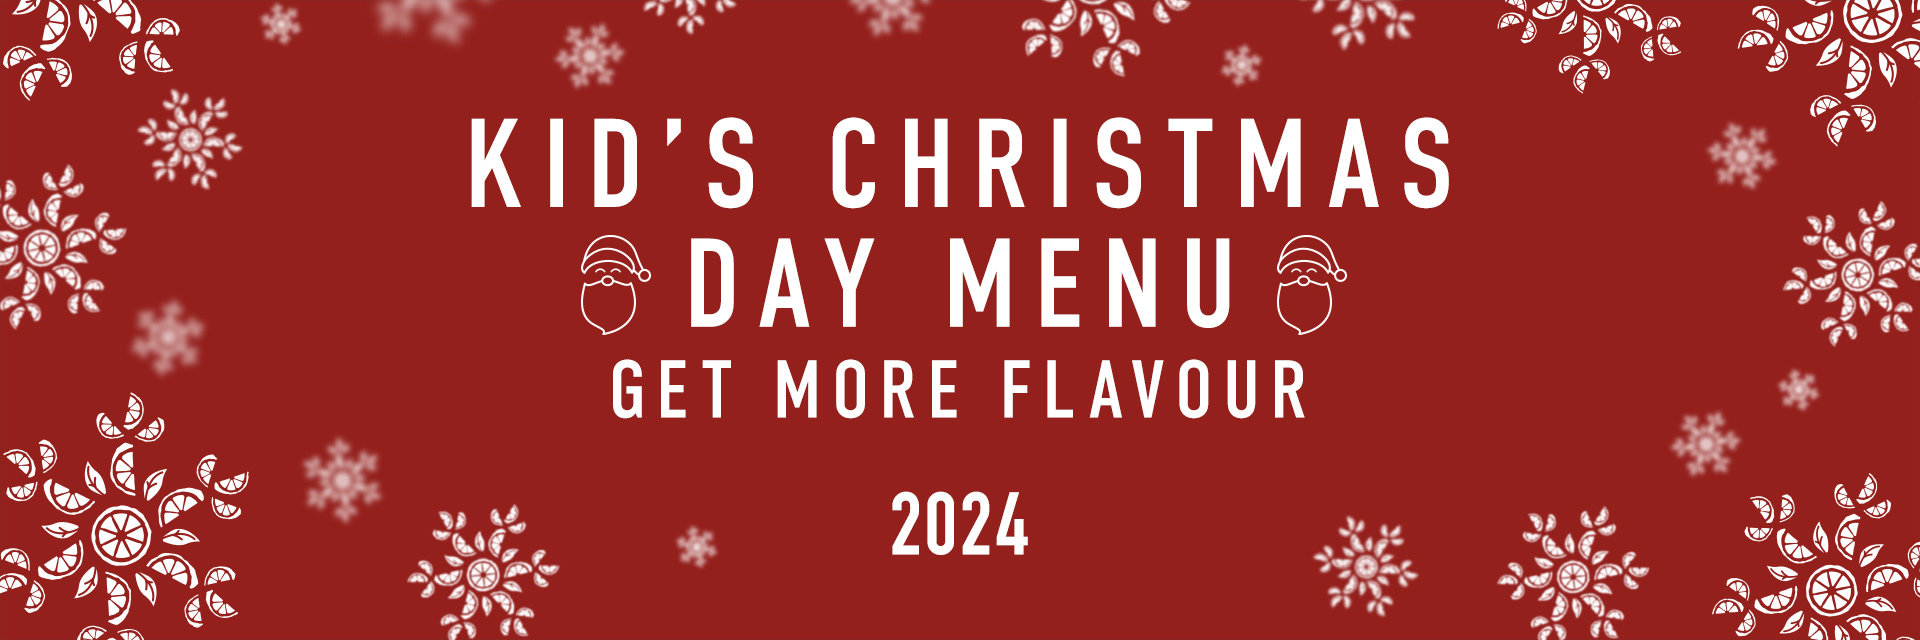 The Two Rivers Kids Christmas Day Menu  - Harvester 